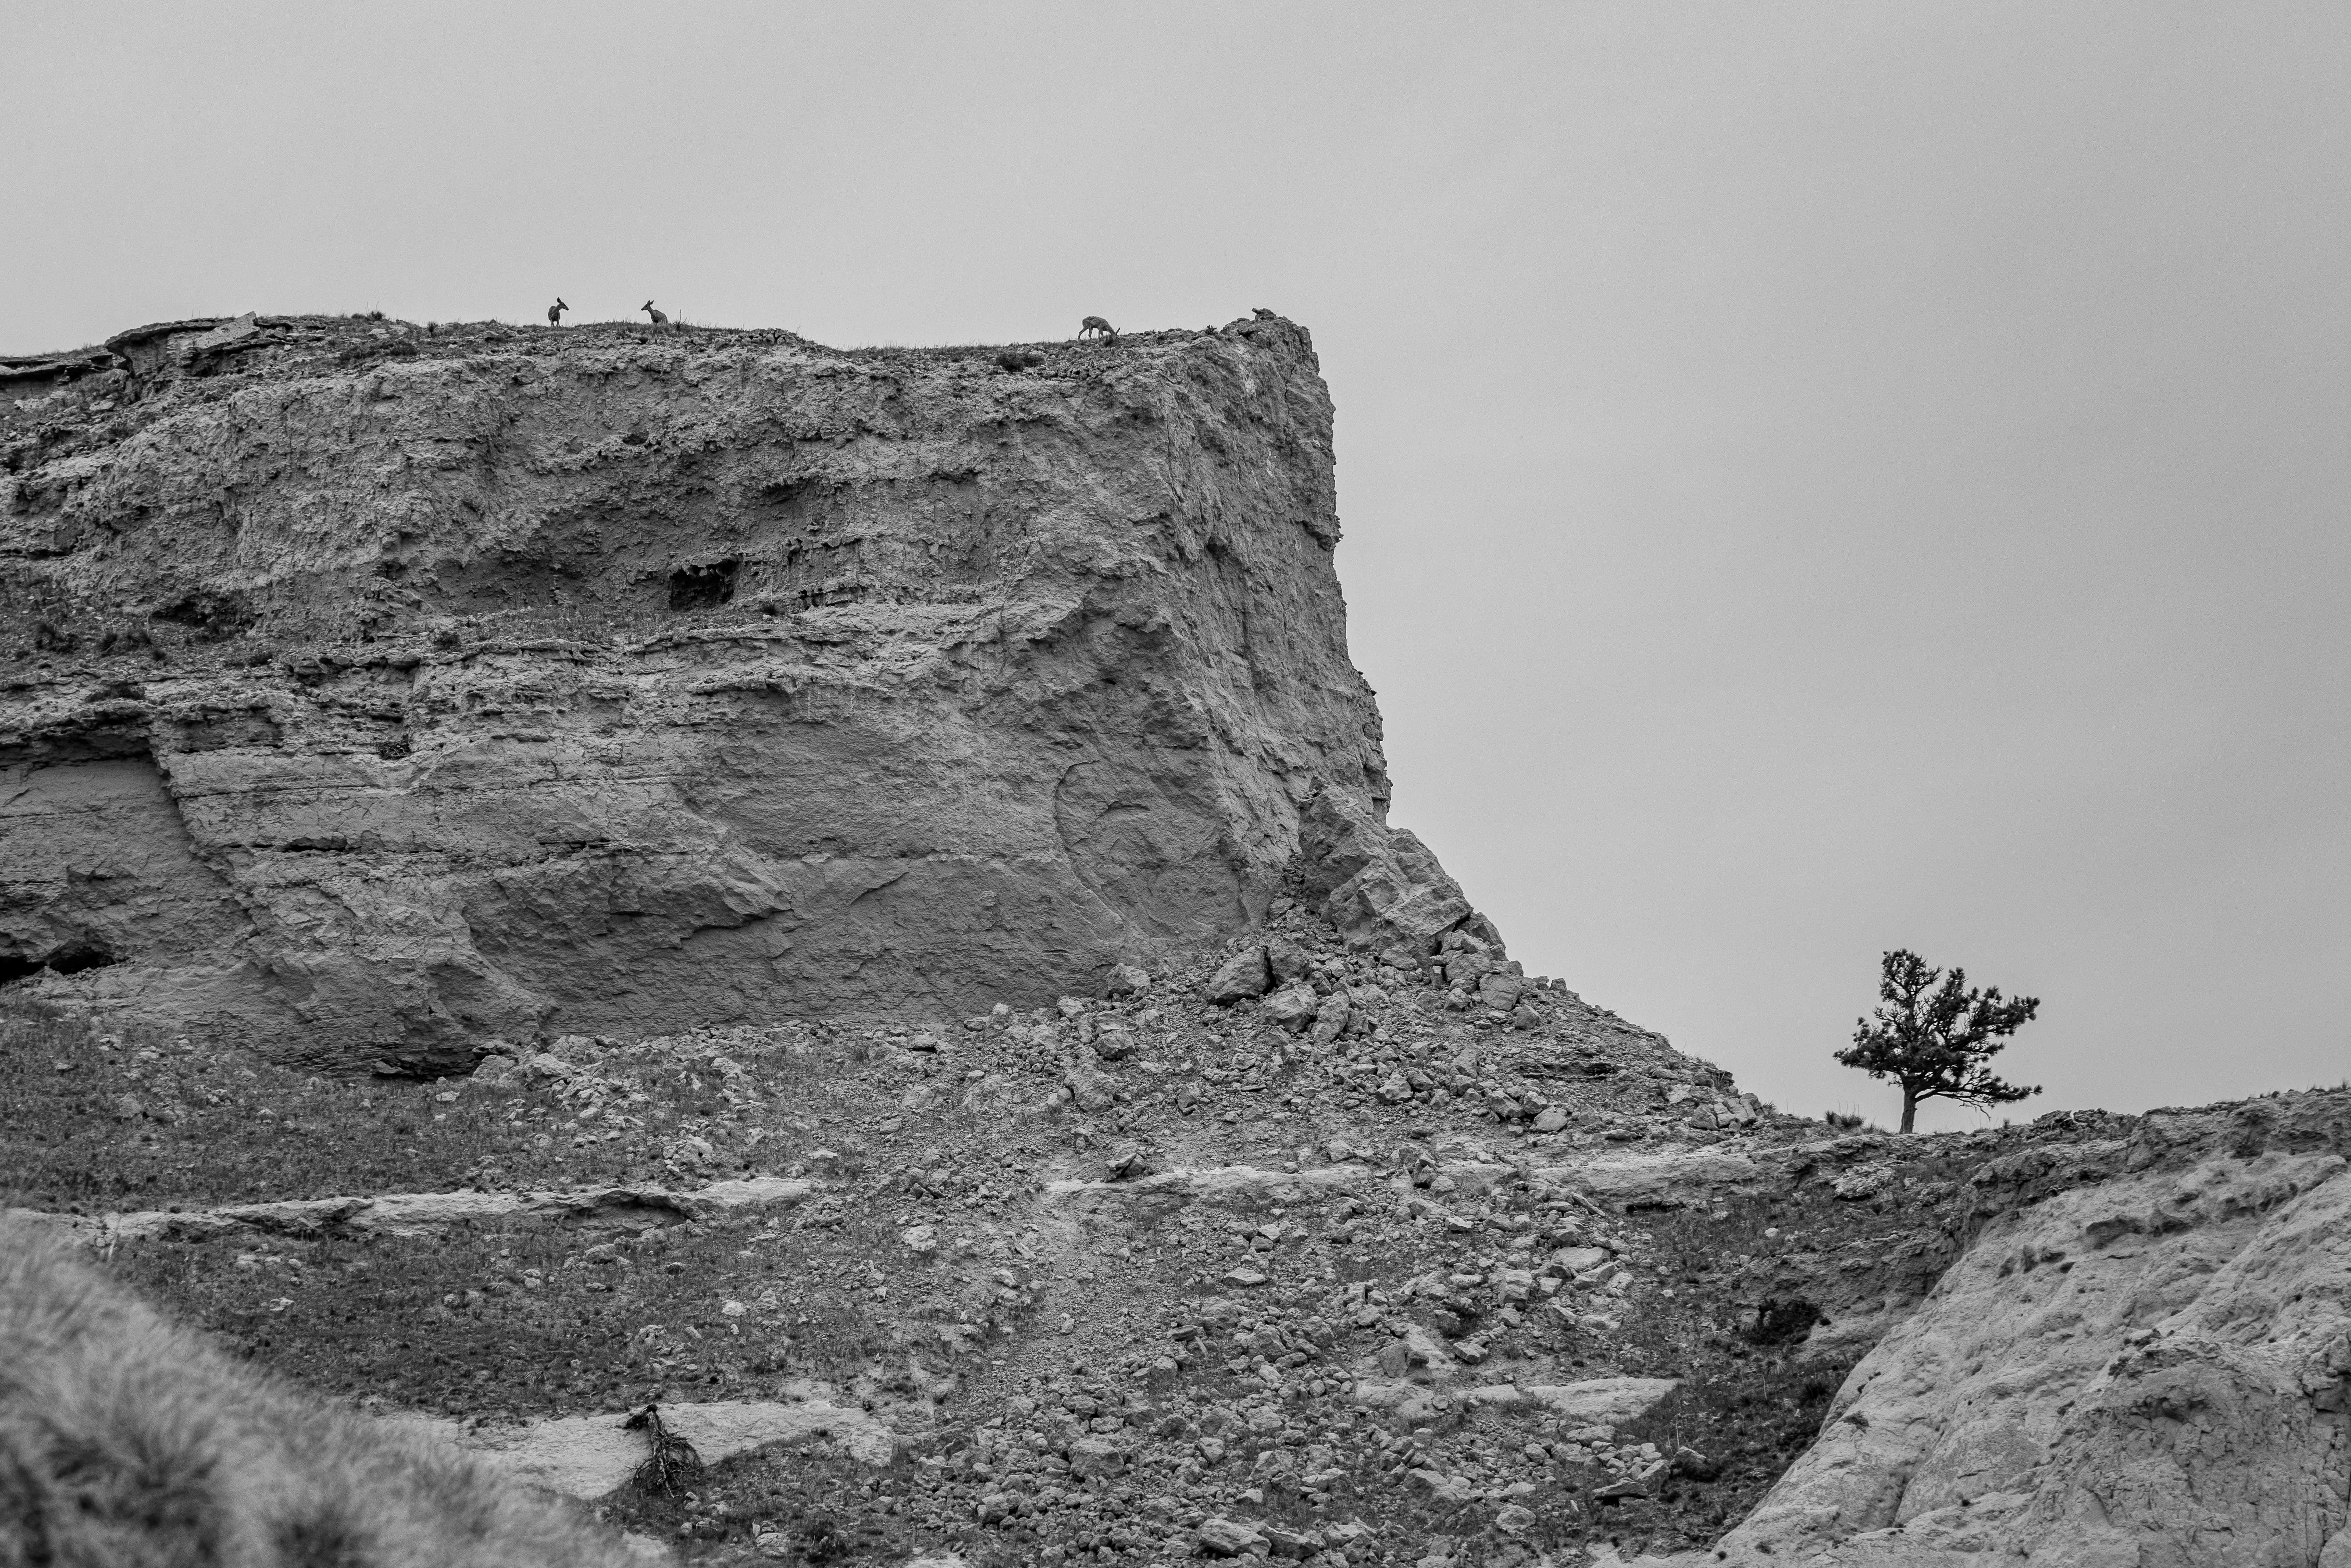 A black and white photo of a massive rocky plateau with three tiny deer grazing on top. The plateau fills the left side of the image, and in the right side, a single tree is silhouetted against the skyline.